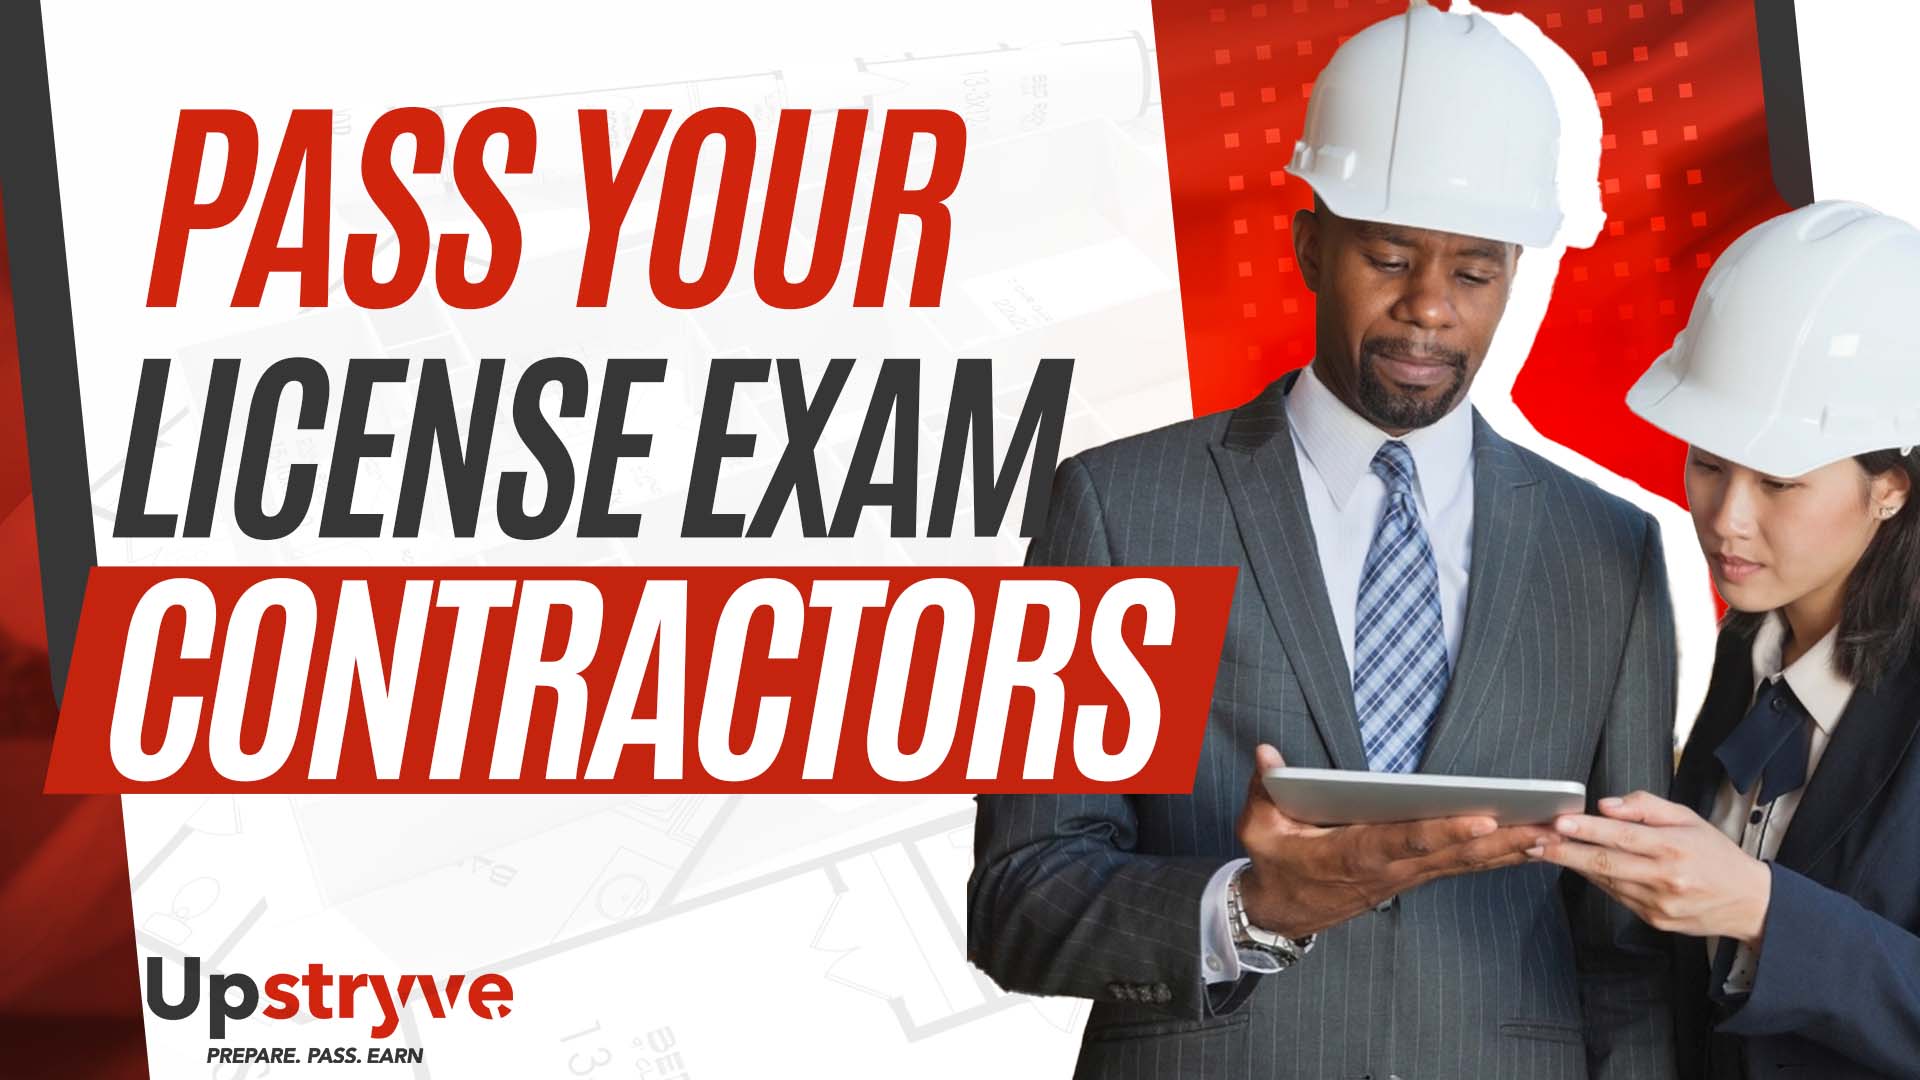 UpStryve Expert in Business and Finance Instructor, Fay Bamond, gives us some feedback and some essential tips for passing your contractor exam. Find out why our unique 1 on 1 tutoring approach can help any student pass their trade exam no matter the barriers. We are proud of our passing rate and hope you get to be a part of our wall of fame. Now is the time to get your contractor license, don't hesitate any longer. Let UpStryve help you prepare, pass and earn.  

Need more help with your trade exam prep? Click here and match with one of our experts 👉 https://upstryve.com/

Interested in becoming a tutor? Join the team 👉 https://upstryve.com/pages/how-to-bec...

Subscribe to our channel: http://bit.ly/UpStryveYouTubeChannel
Join us on Facebook: https://www.facebook.com/upstryveinc
Follow us on Instagram : https://www.instagram.com/upstryve

Upstryve connects the future tradespeople of America with industry experts for a personalized 1 on 1 tutoring experience. Get the expert guidance you need to pass your trade exam and get your license. Our instructors specialize in exam preparation for general contractor, electrical contractor, plumbing contractor, HVAC and more. Prepare, Pass and Earn with Upstryve.

#Upstryve #Contractor #ContractorExam #GeneralContractor